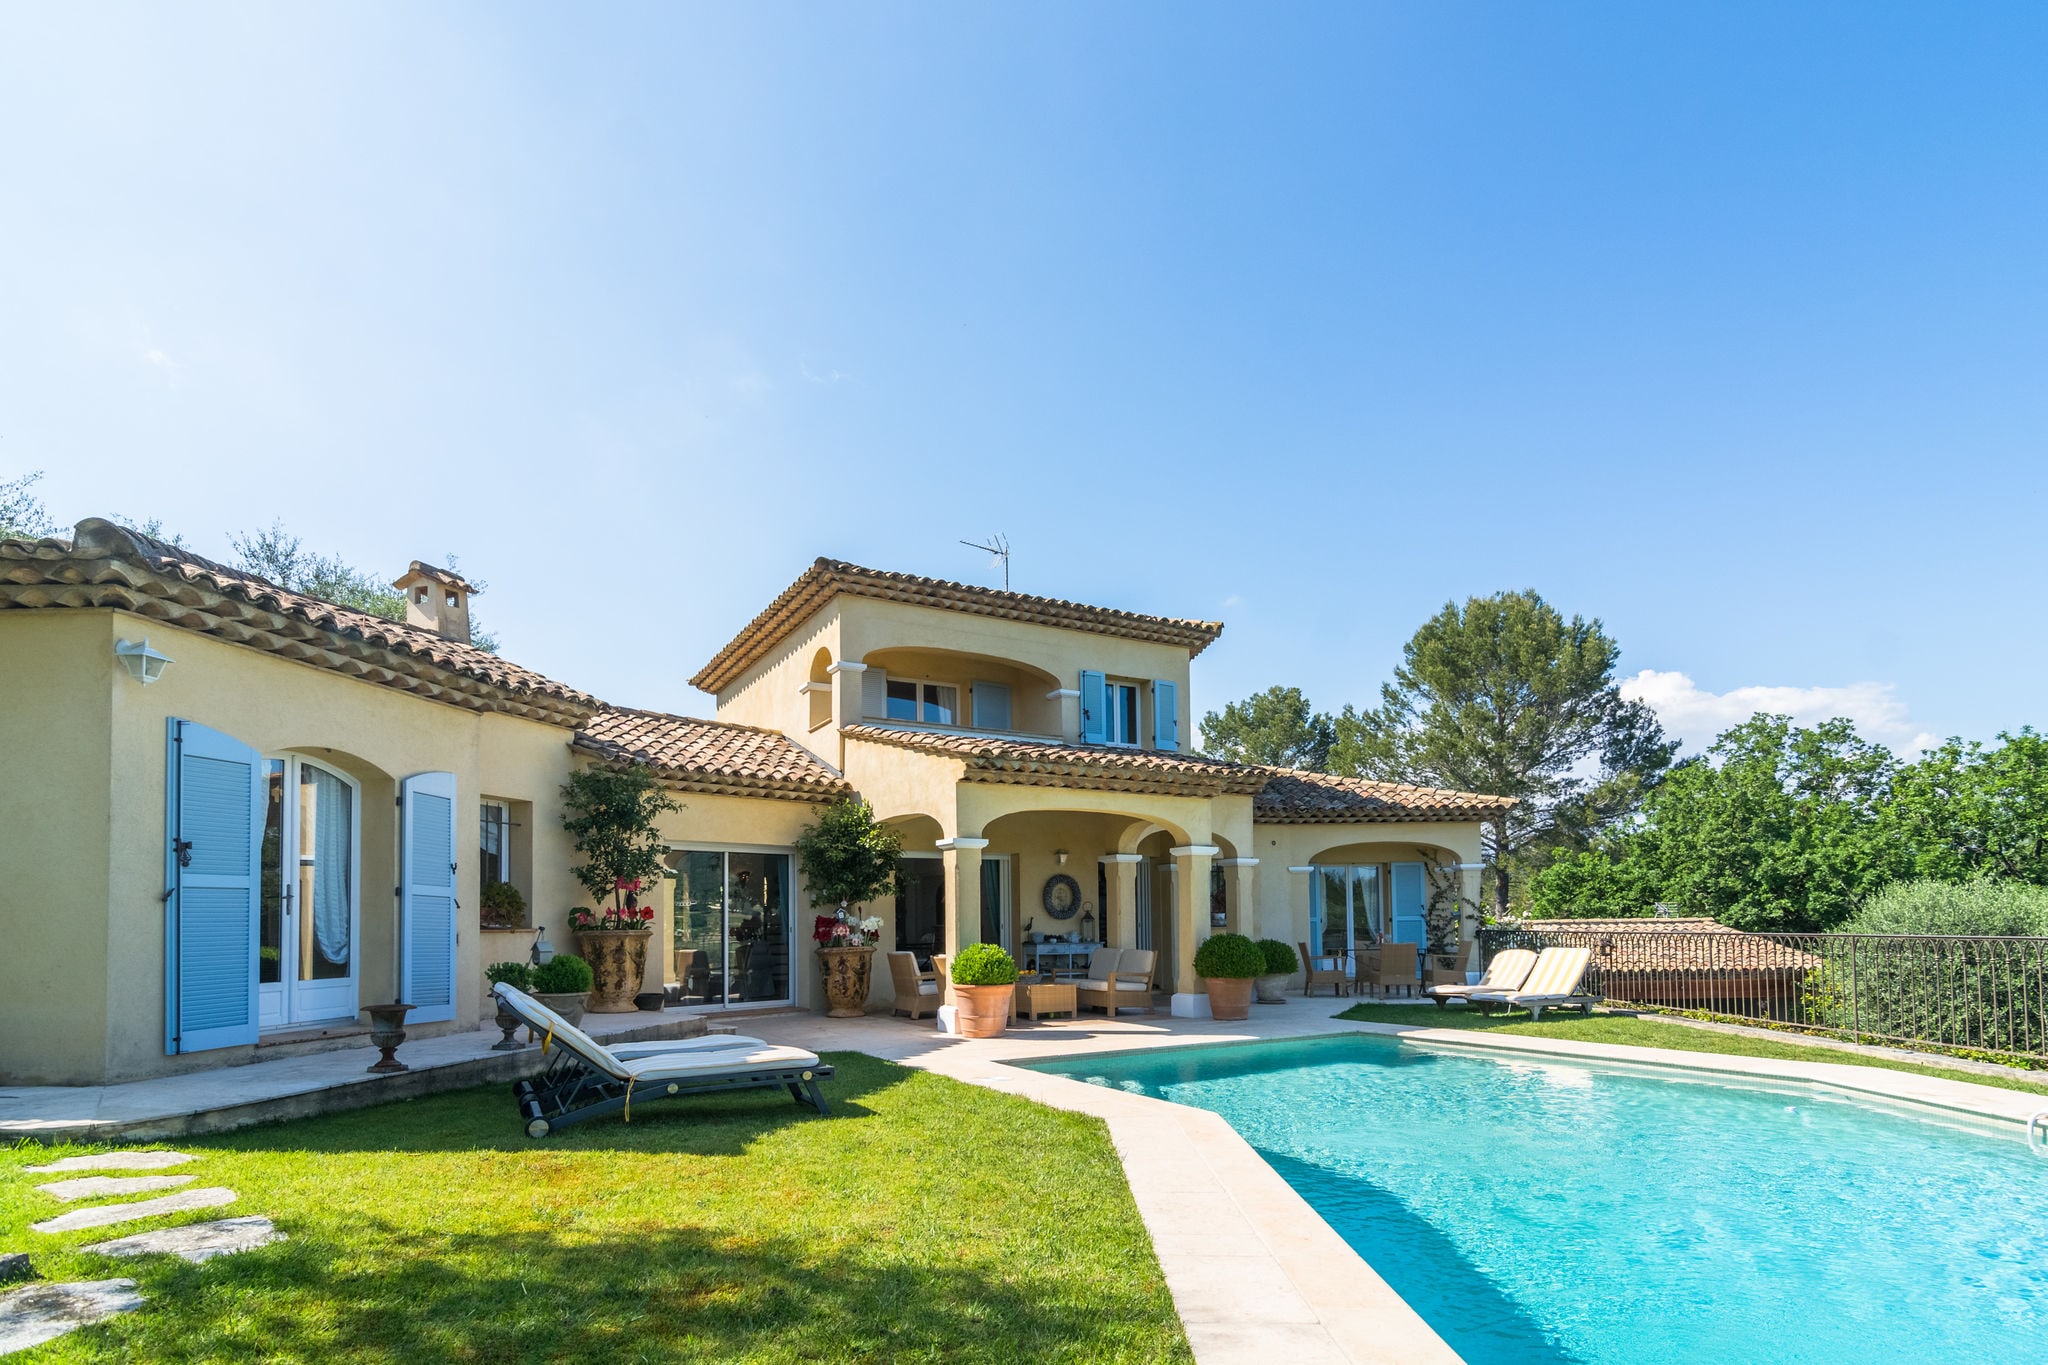 Luxurious villa with internet and private swimming pool, near Grasse (12 km)